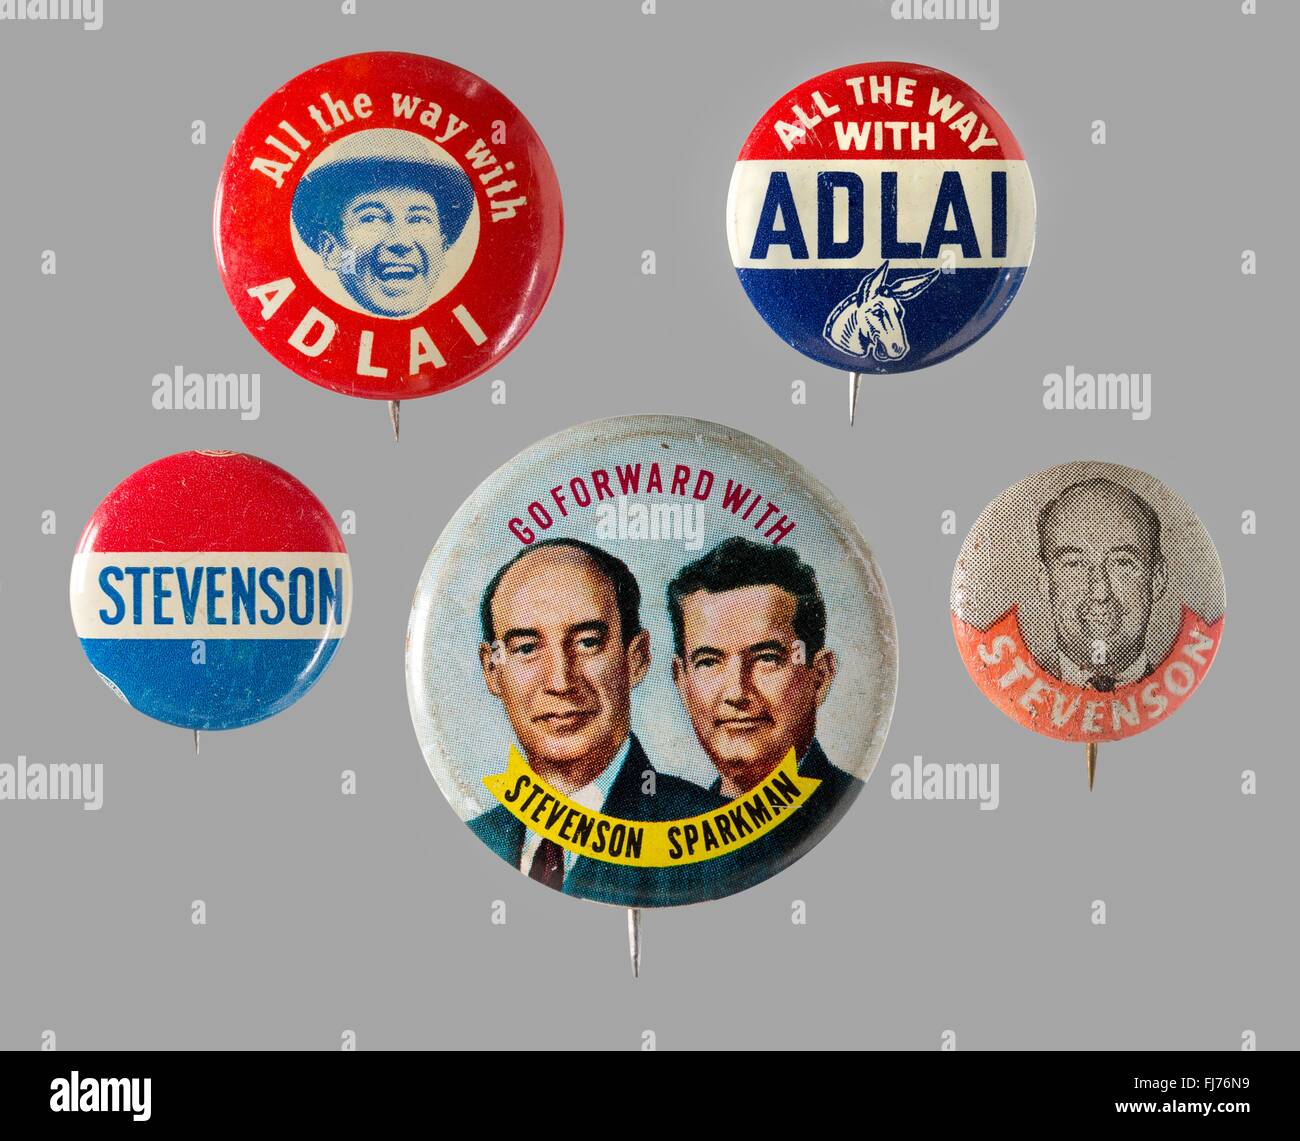 1952 and 1956 US presidential campaign buttons for Adlai Stevenson -John Sparkman was Stevenson's 1952 vice presidential running mate. Stock Photo